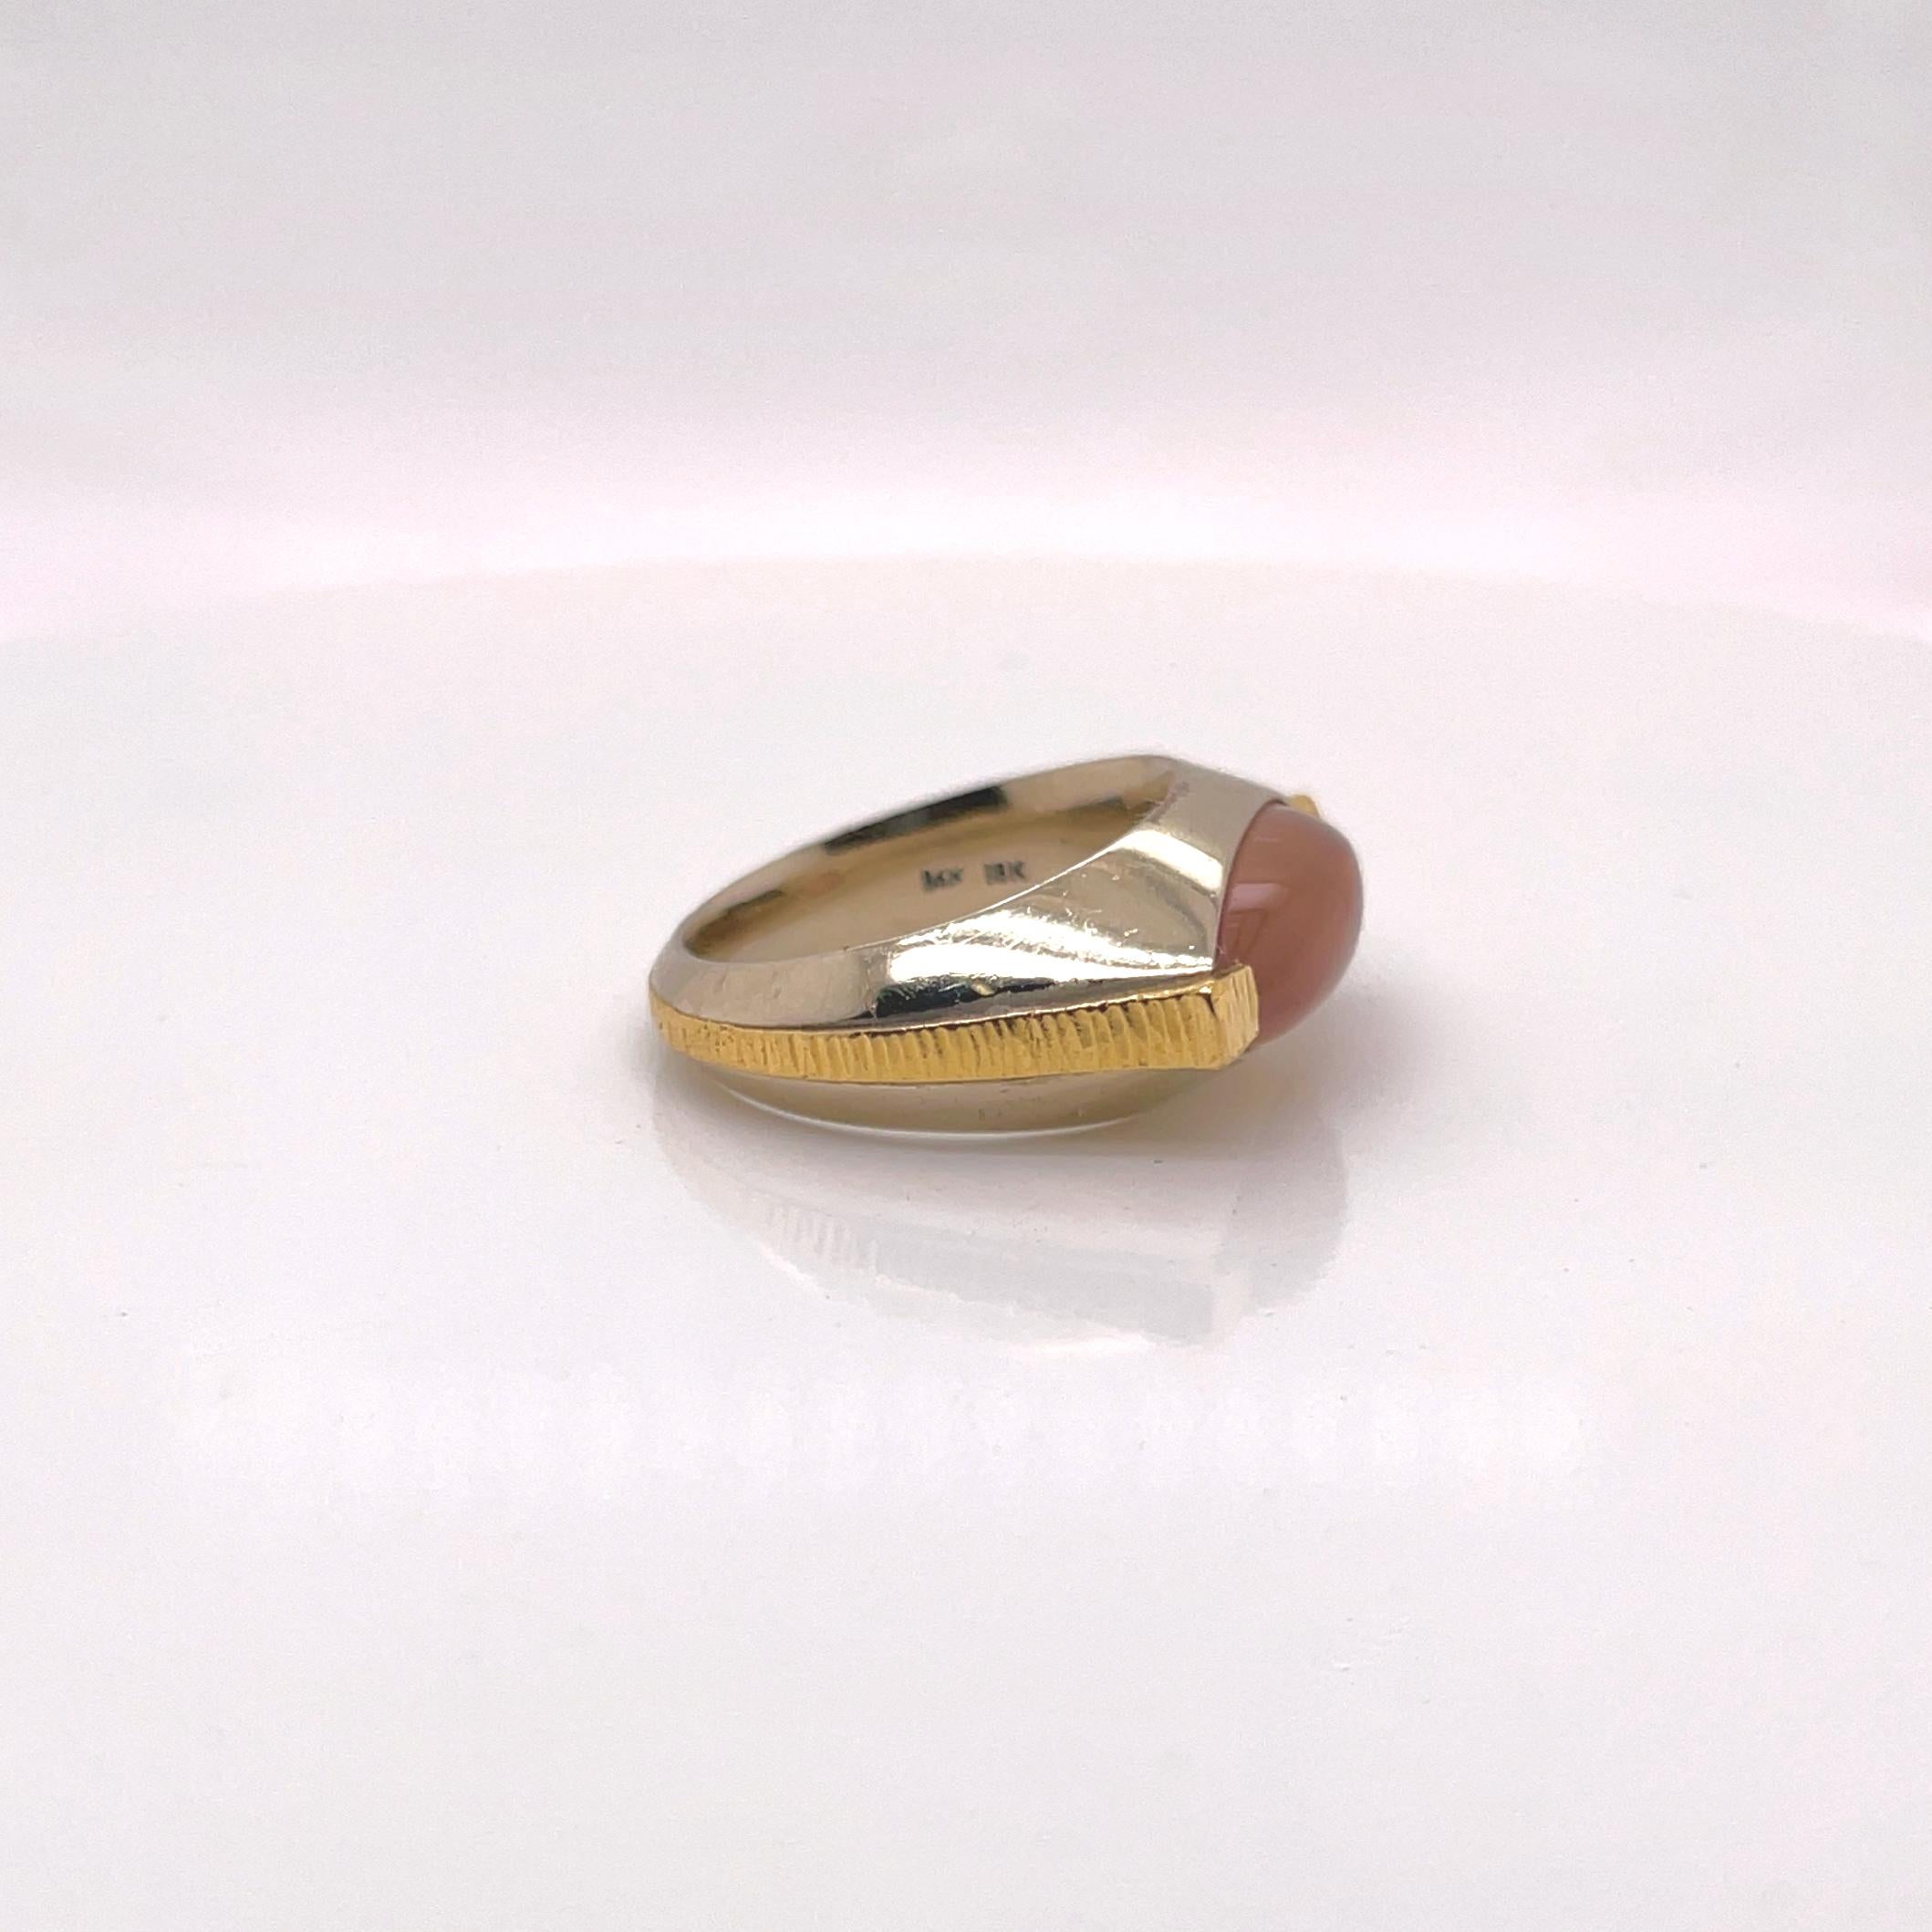 Cabochon Signed Mettal Studios / Stefani & Co. Mixed Metals Gold & Pink Sapphire Ring For Sale